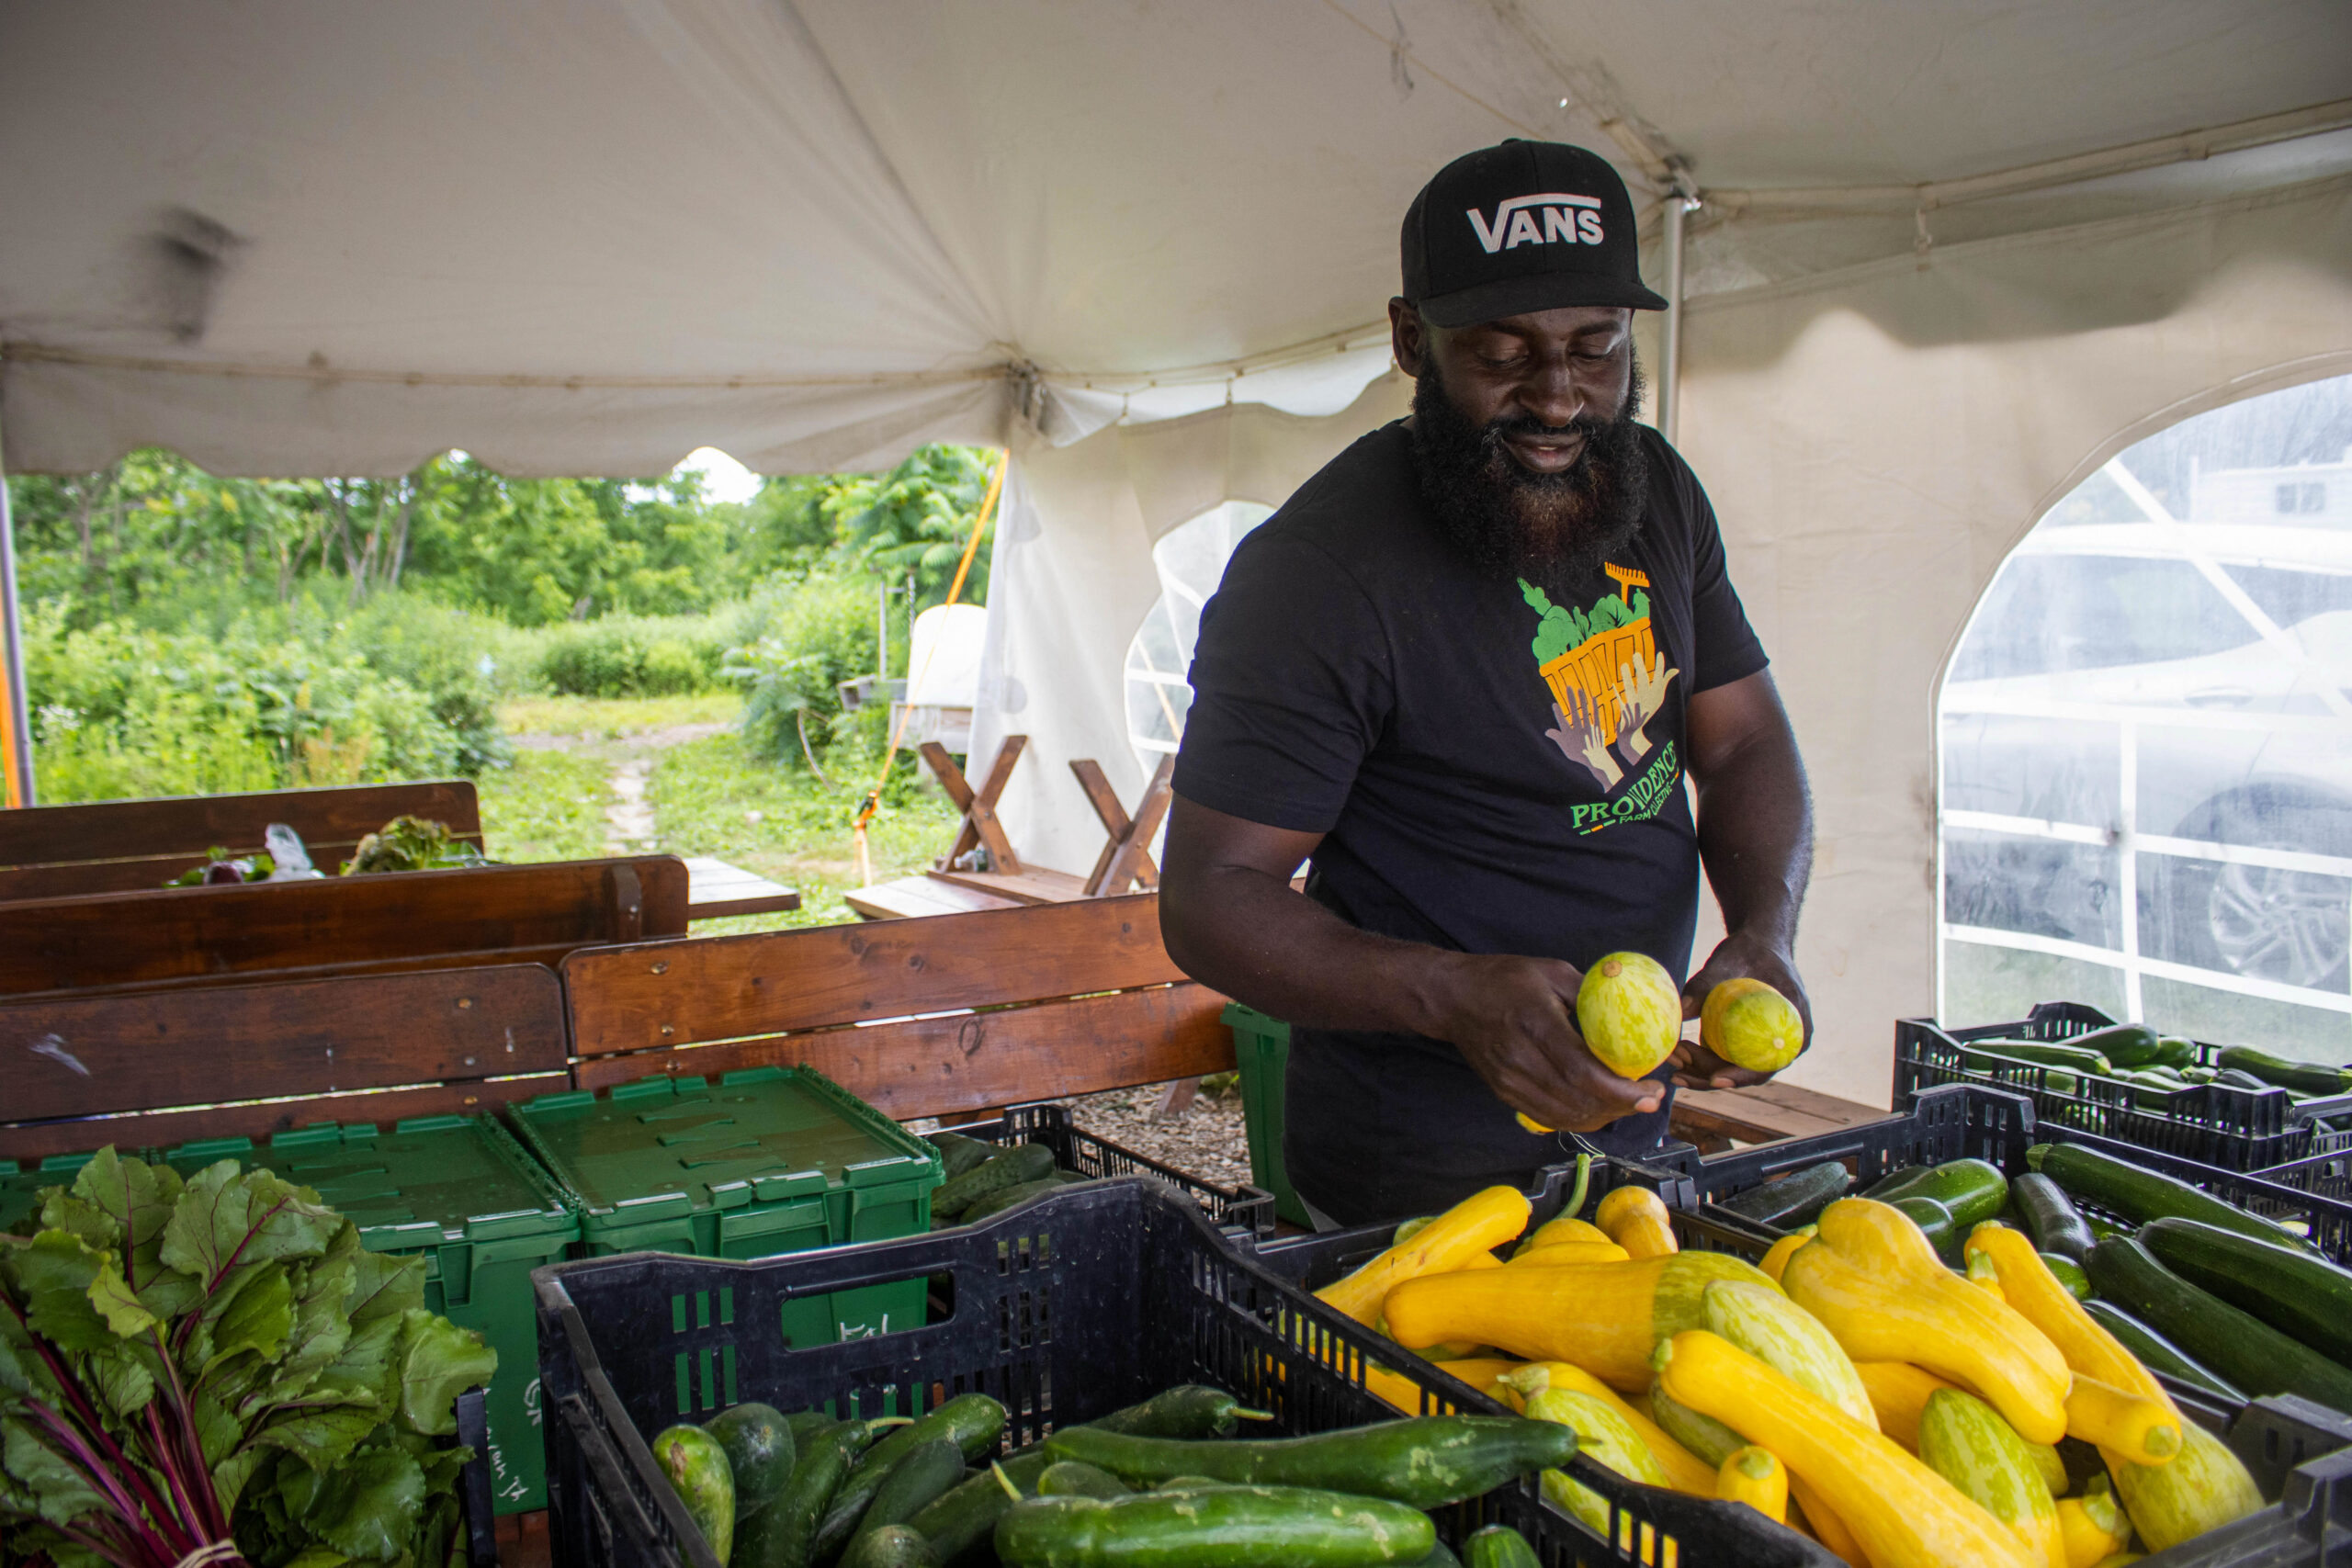 Share crops with 200 immigrant families at Orchard Park market